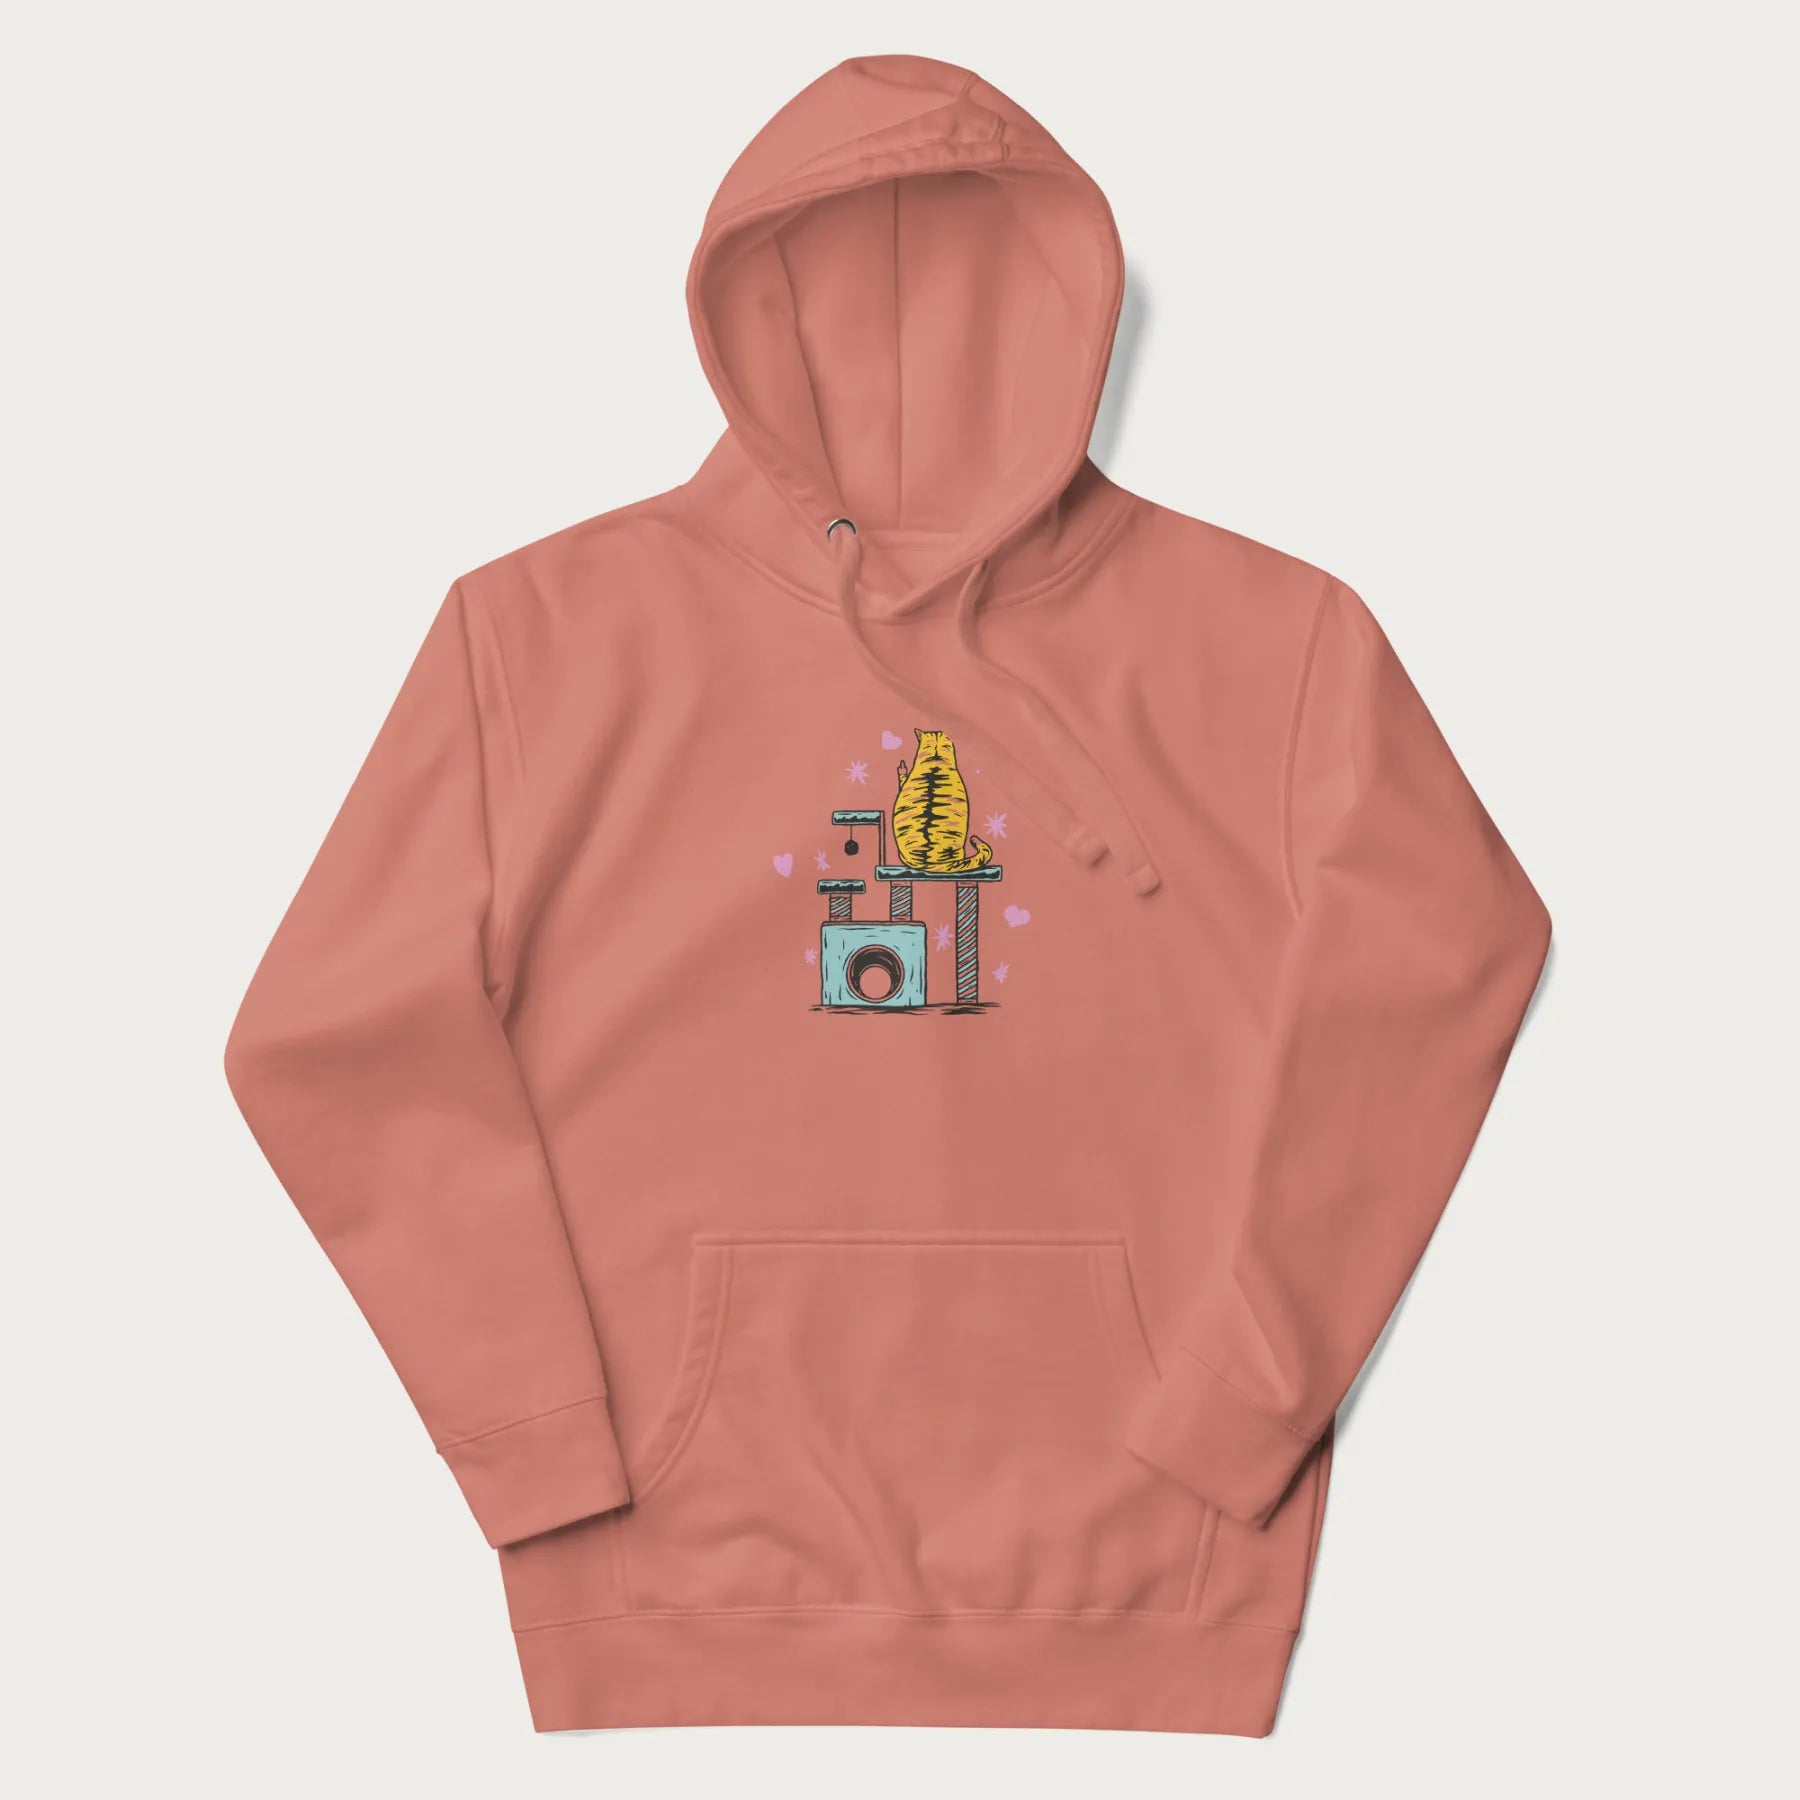 Light pink hoodie with graphic of a tabby cat on a scratching post, raising its middle finger.